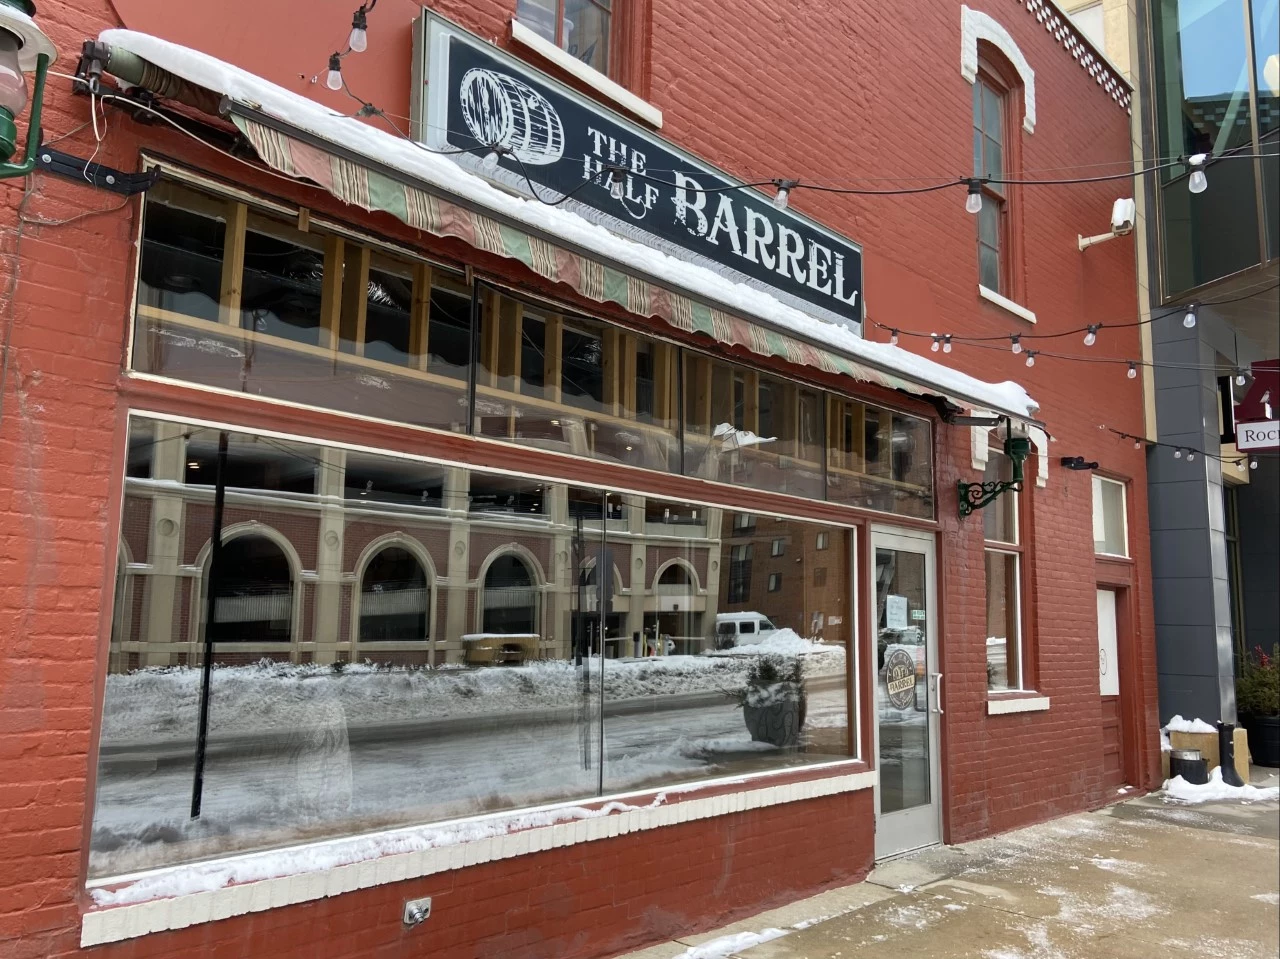 What's Going On With The Half Barrel in Rochester?